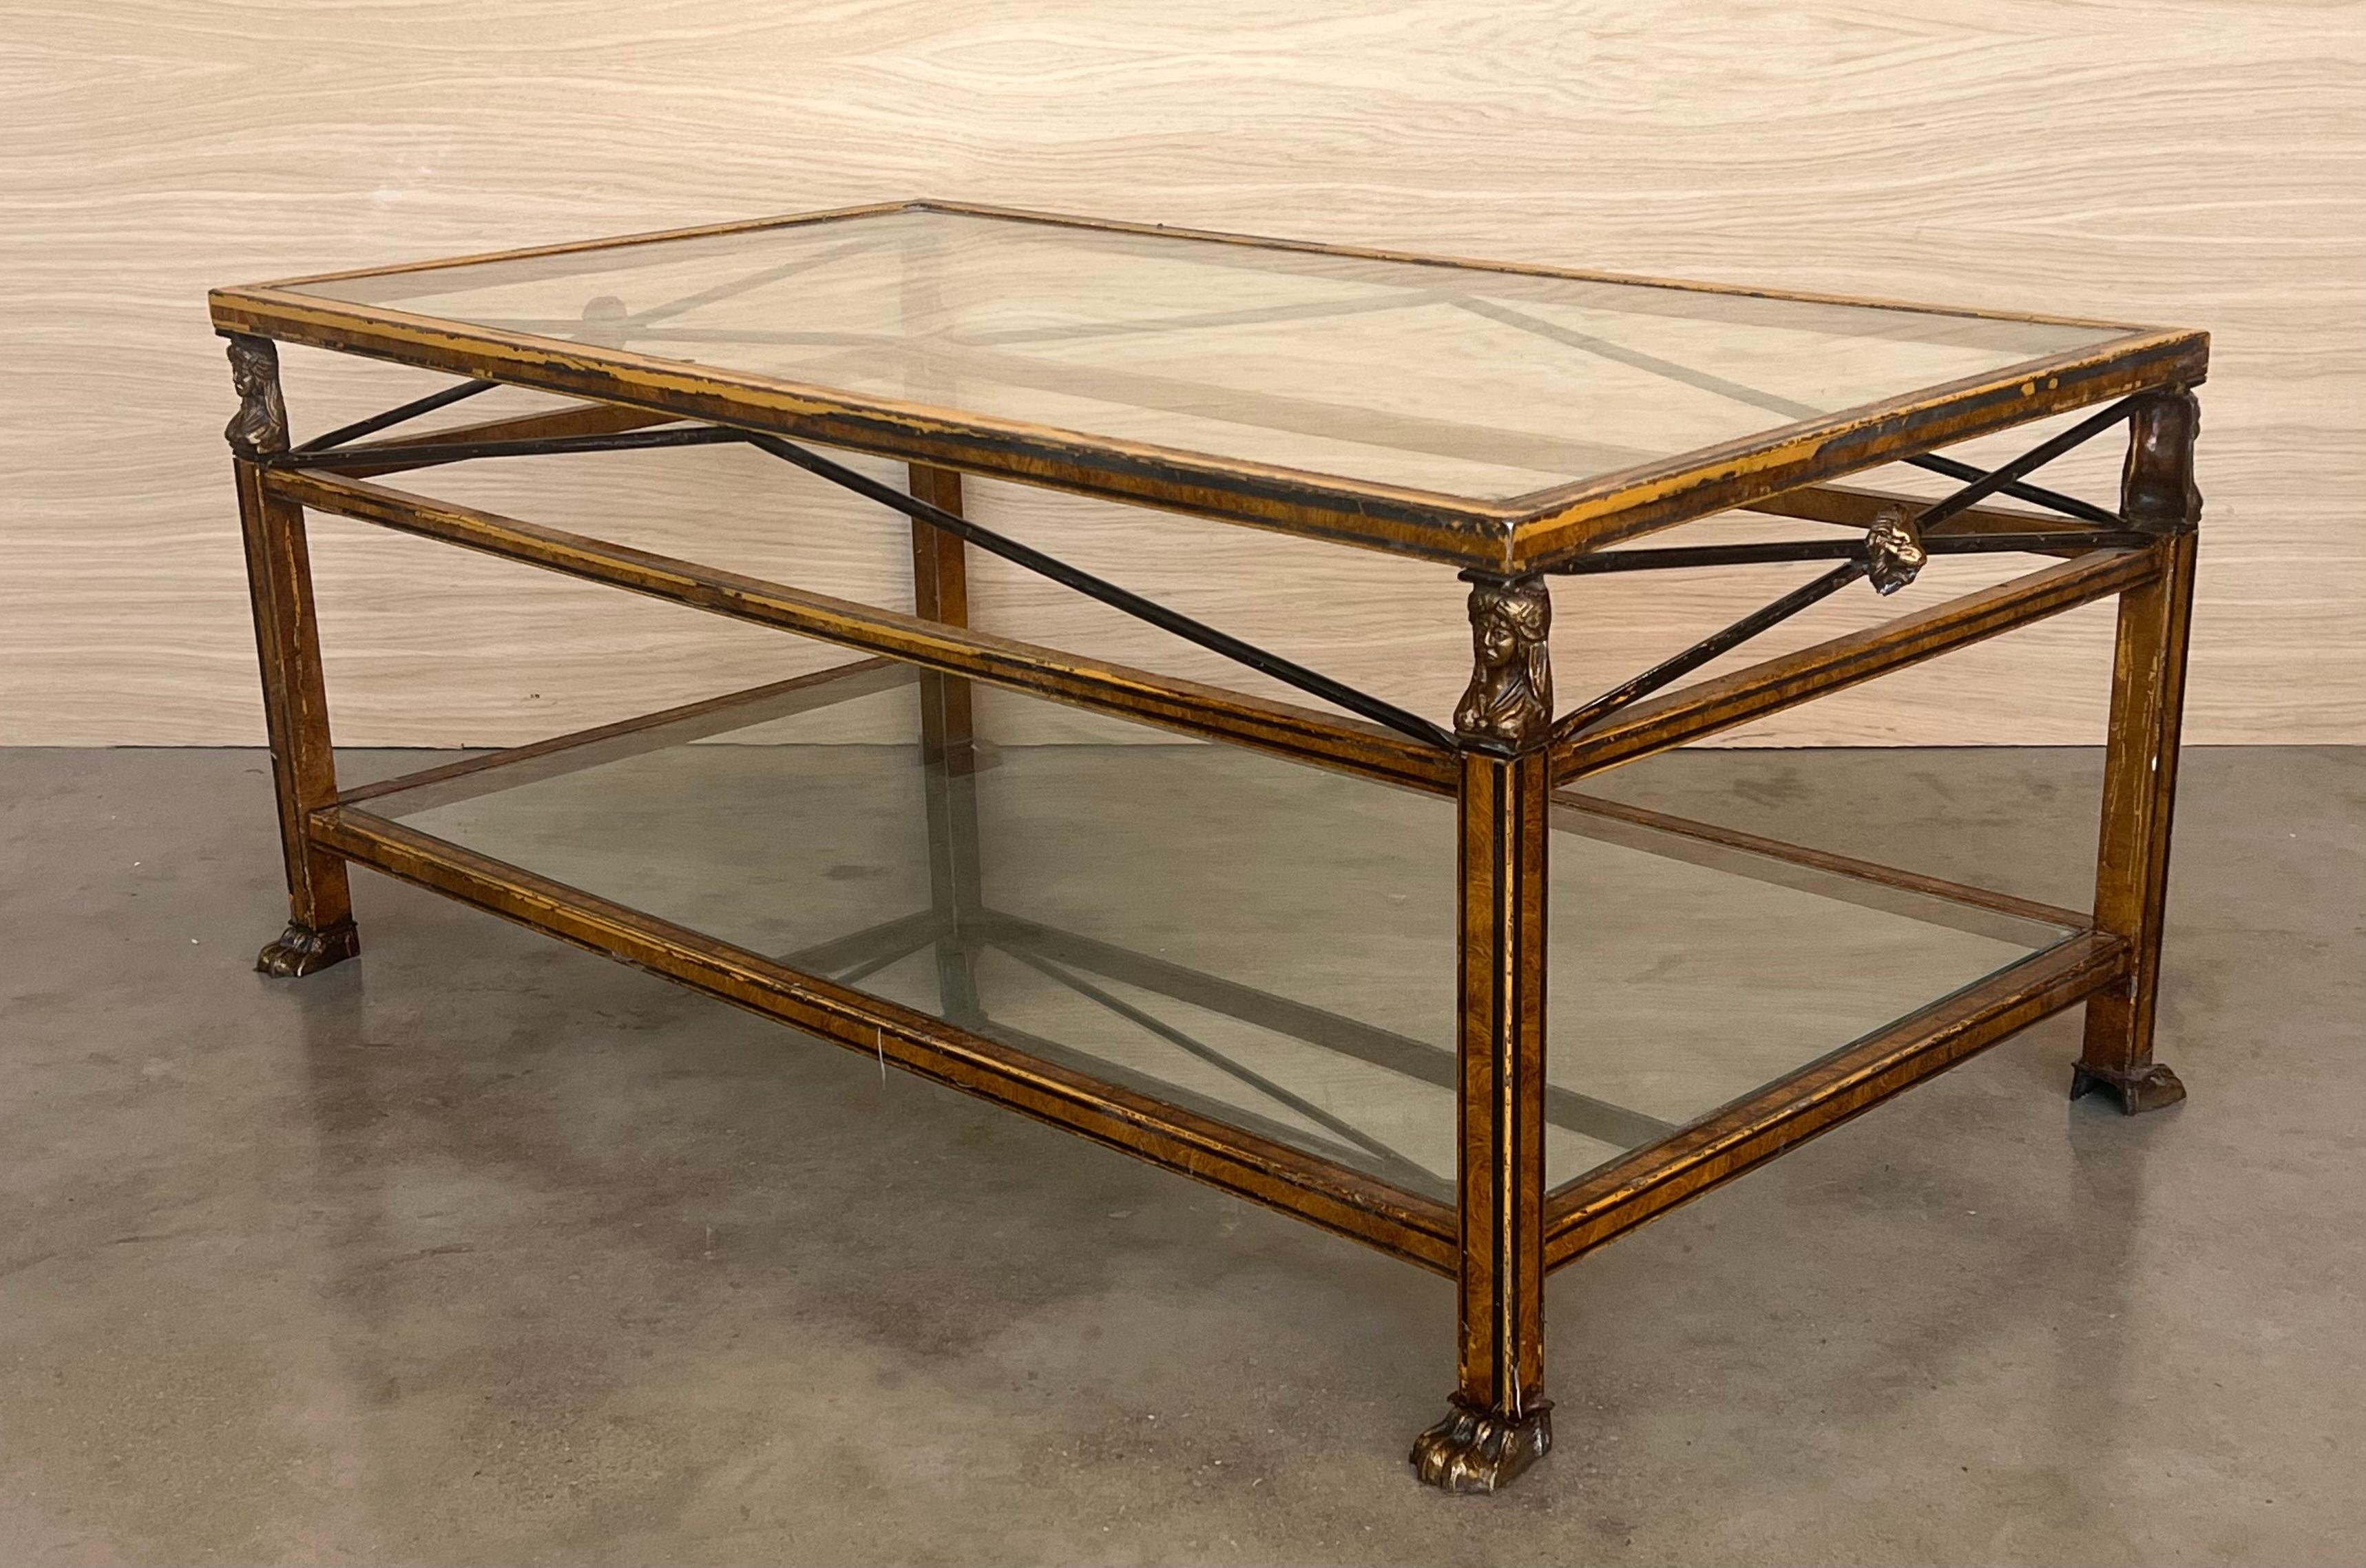 Midcentury Brown Metal Rectangular Coffee Table with Two Tier Glass 1970 For Sale 1